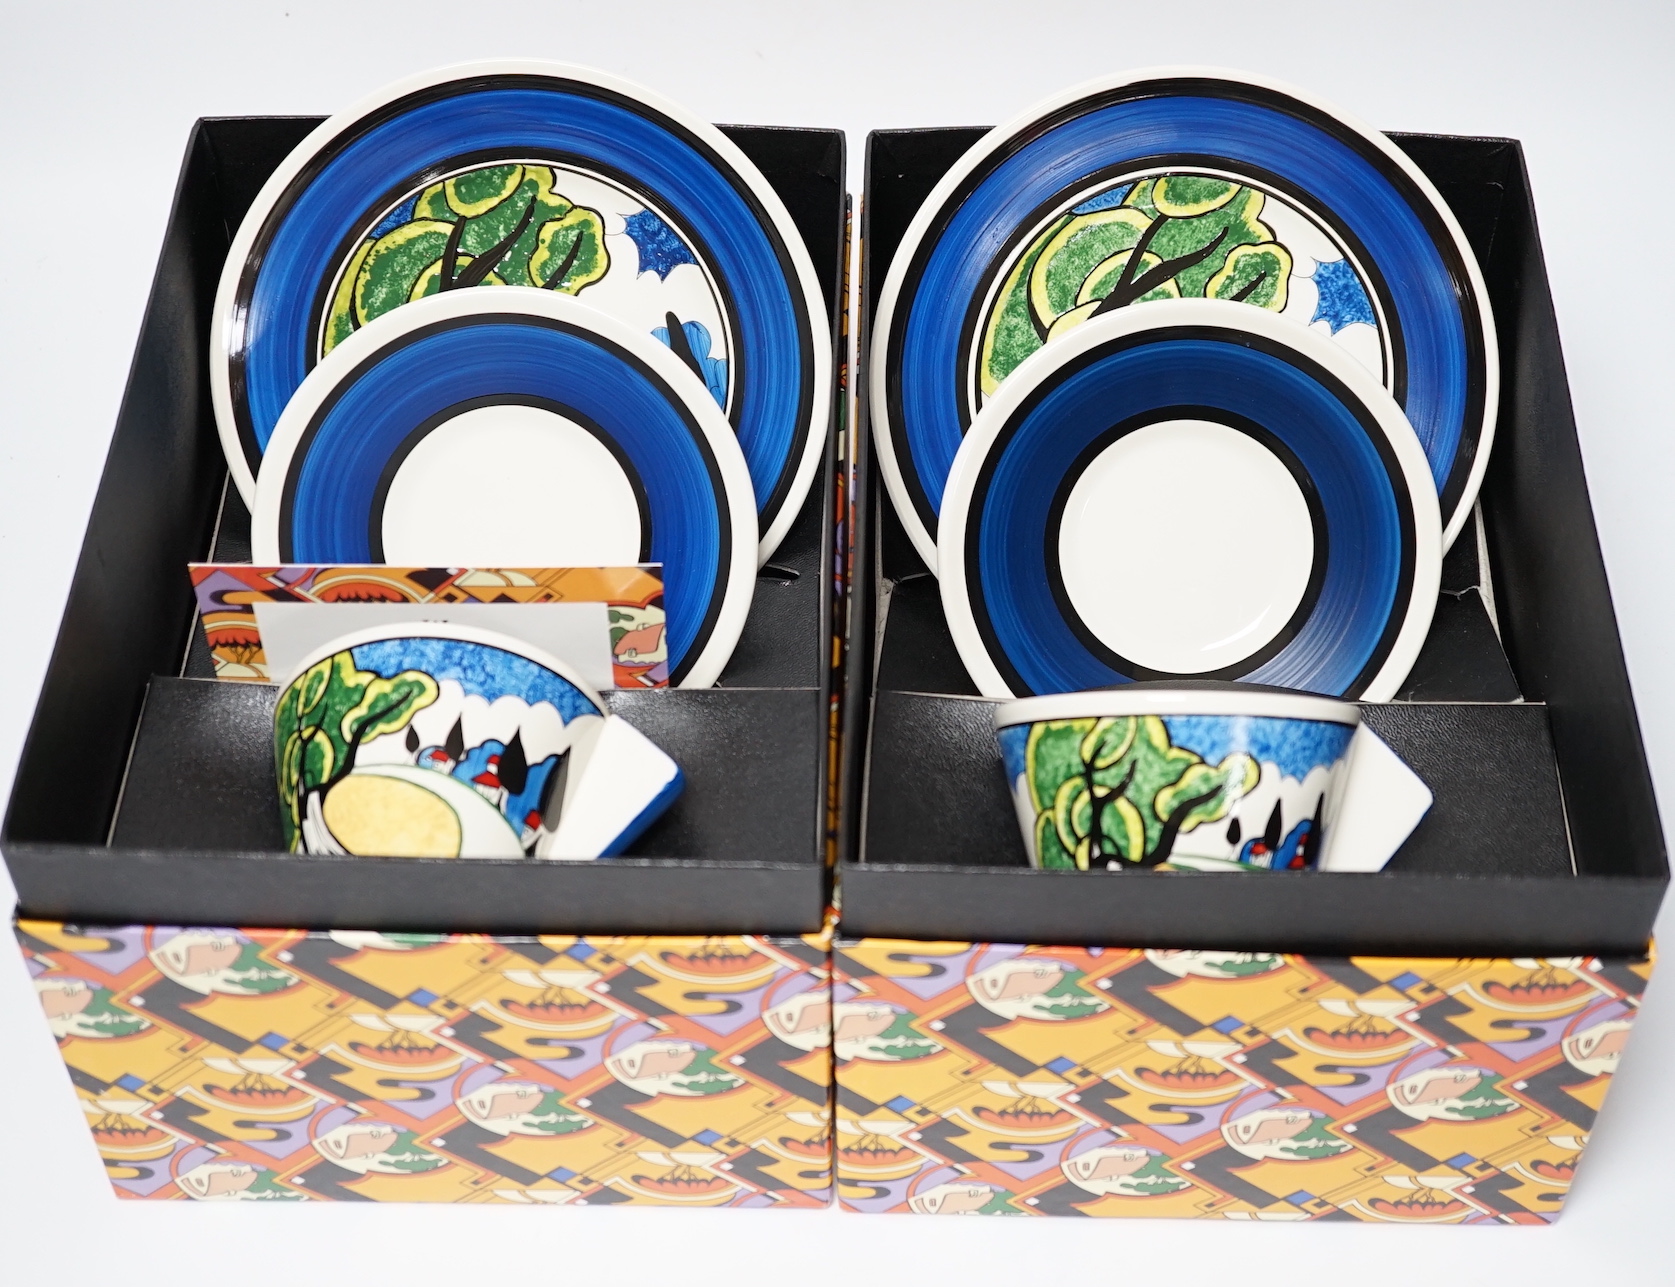 Two Wedgwood Clarice Cliff limited edition May Avenue trios, limited edition, boxed with certificates